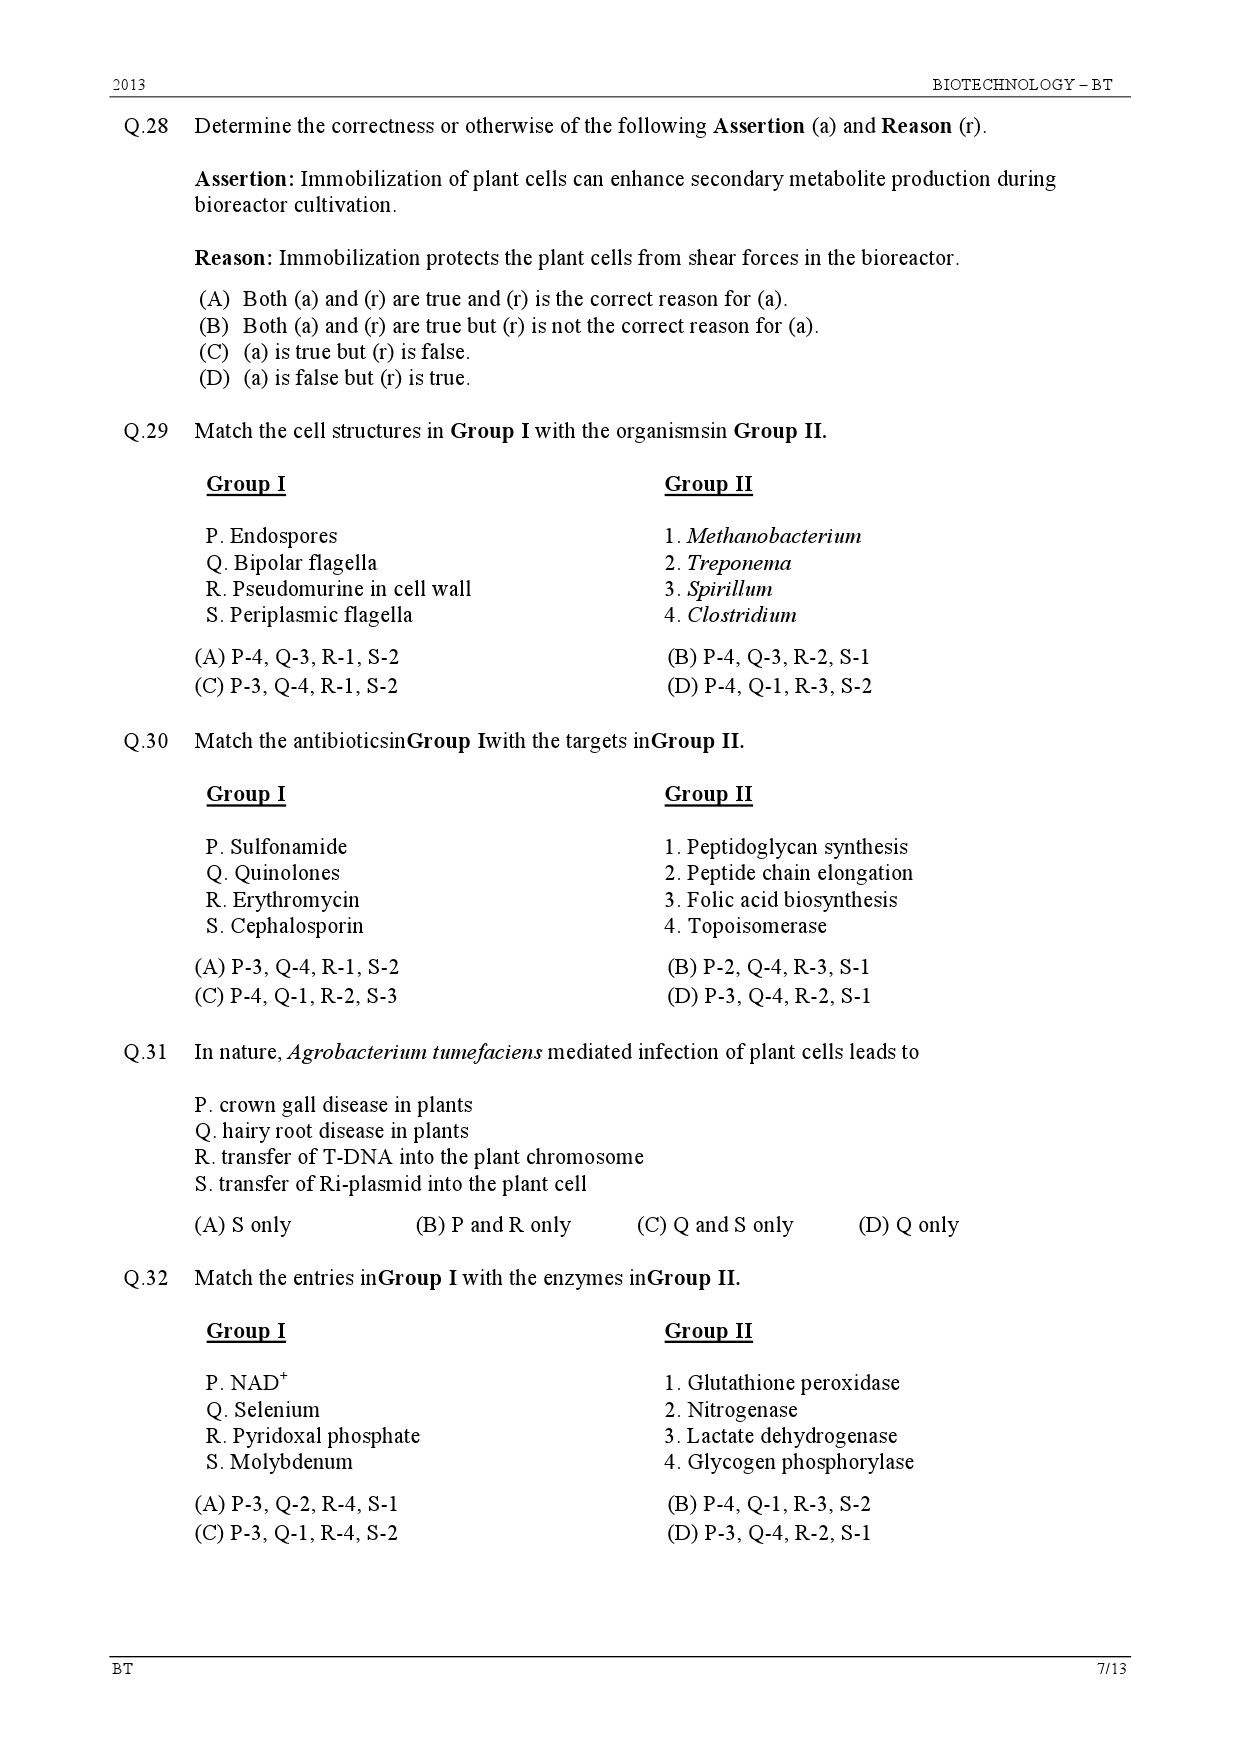 GATE Exam Question Paper 2013 Biotechnology 7